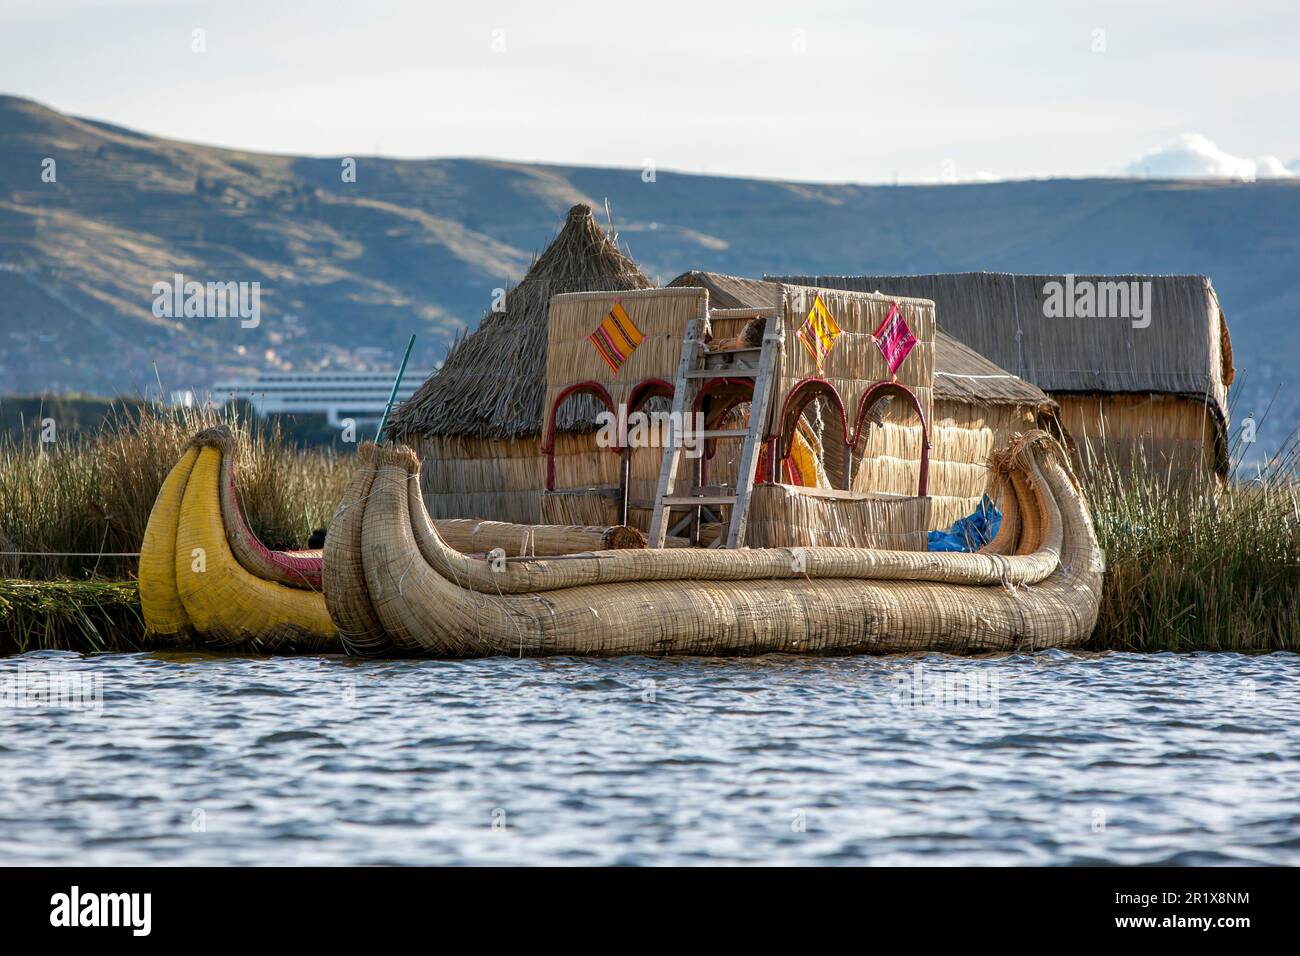 Floating reed boats, also known as balsas adjacent to one of the islands which makes up the floating reed islands of Uros on Lake Titicaca in Peru. Stock Photo